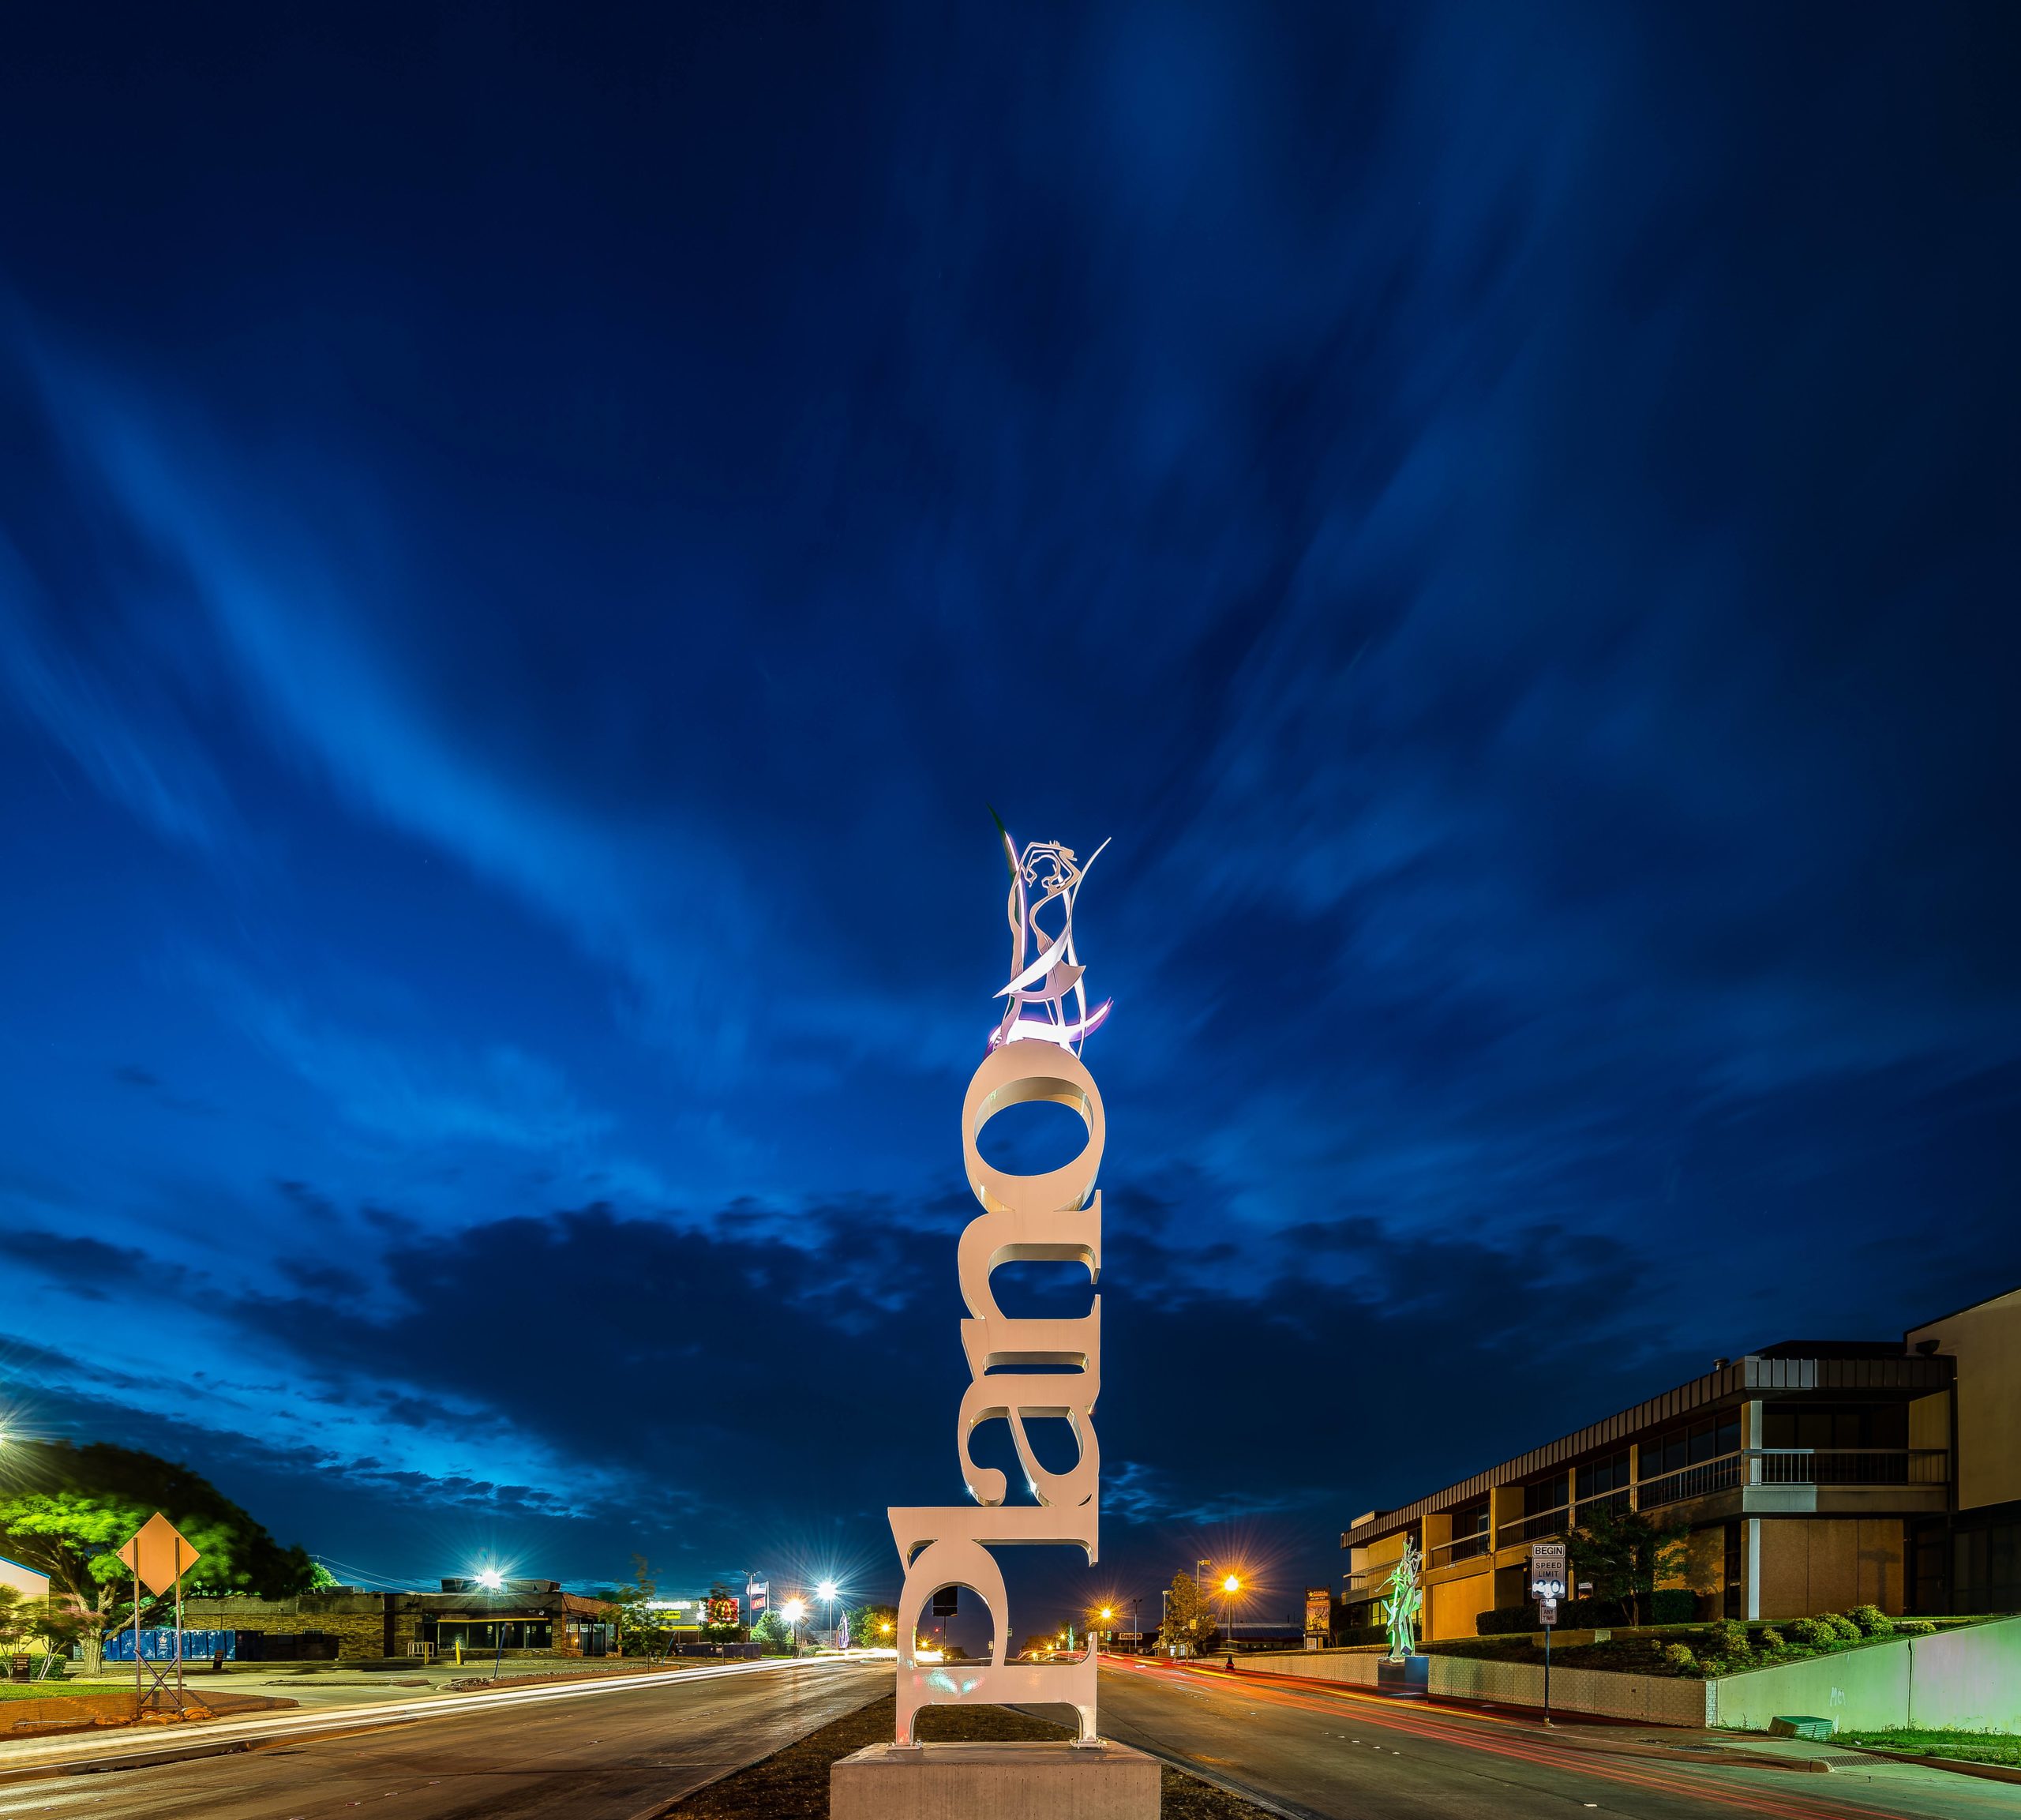 Guide to the Downtown Plano Arts District